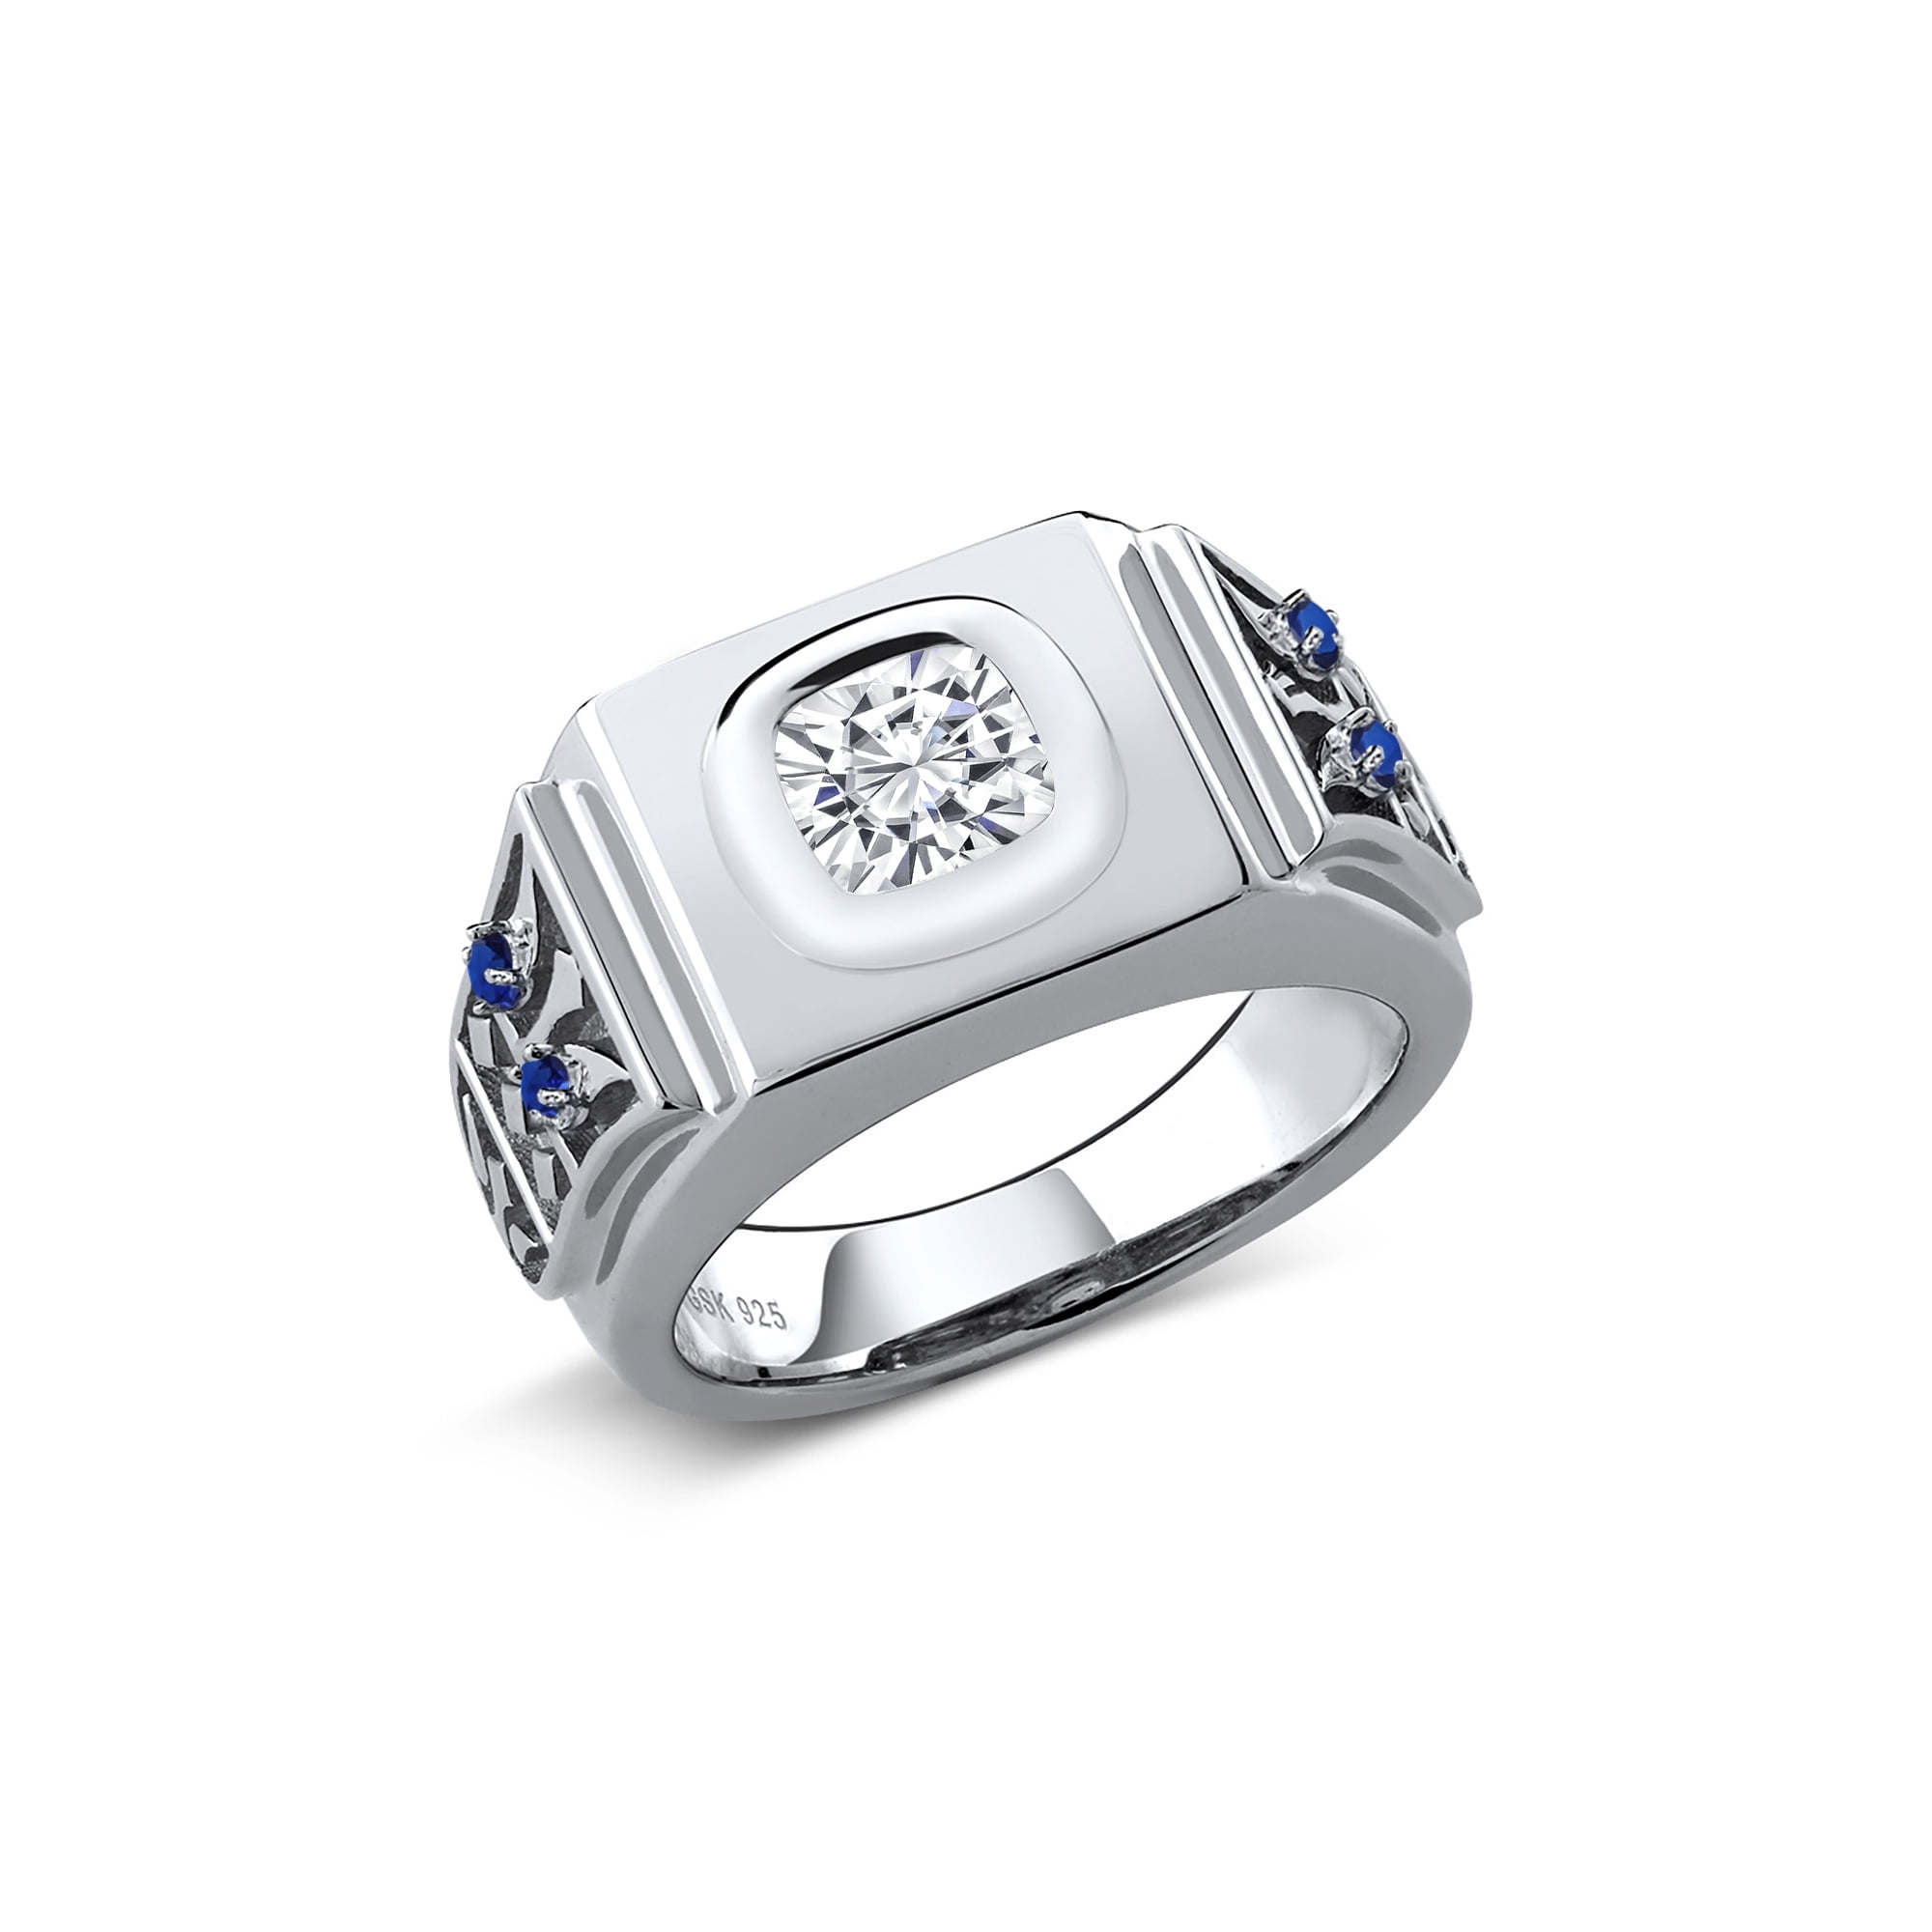 Gem Stone King 925 Sterling Silver Men's Ring Forever Classic Cushion  1.74cttw Moissanite by Charles & Colvard and Created Sapphire 